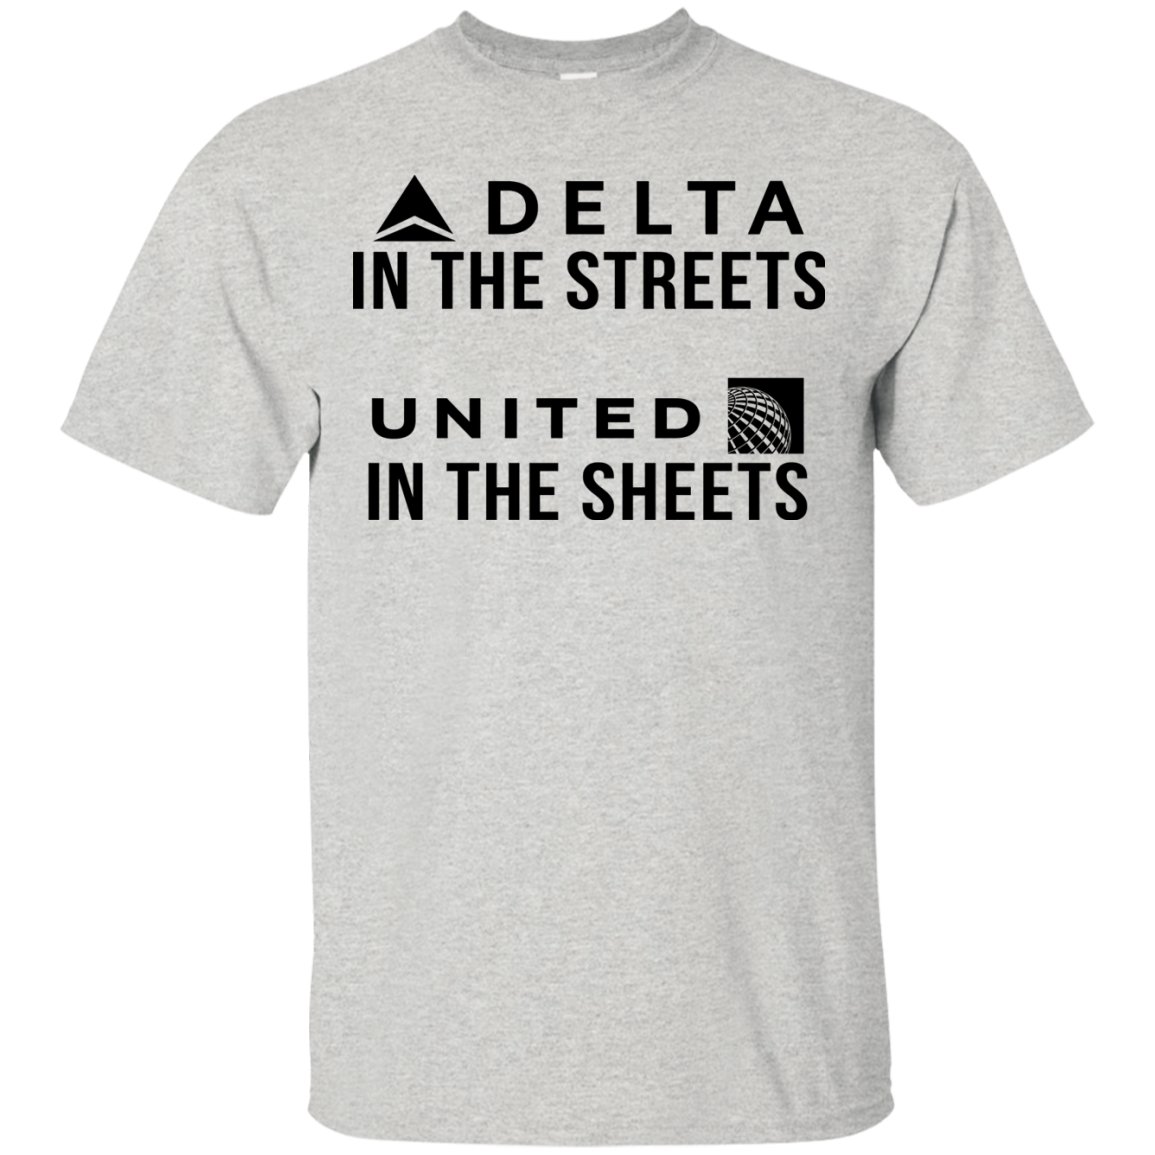 Delta In The Streets United In The Sheets T-shirt White Shirt